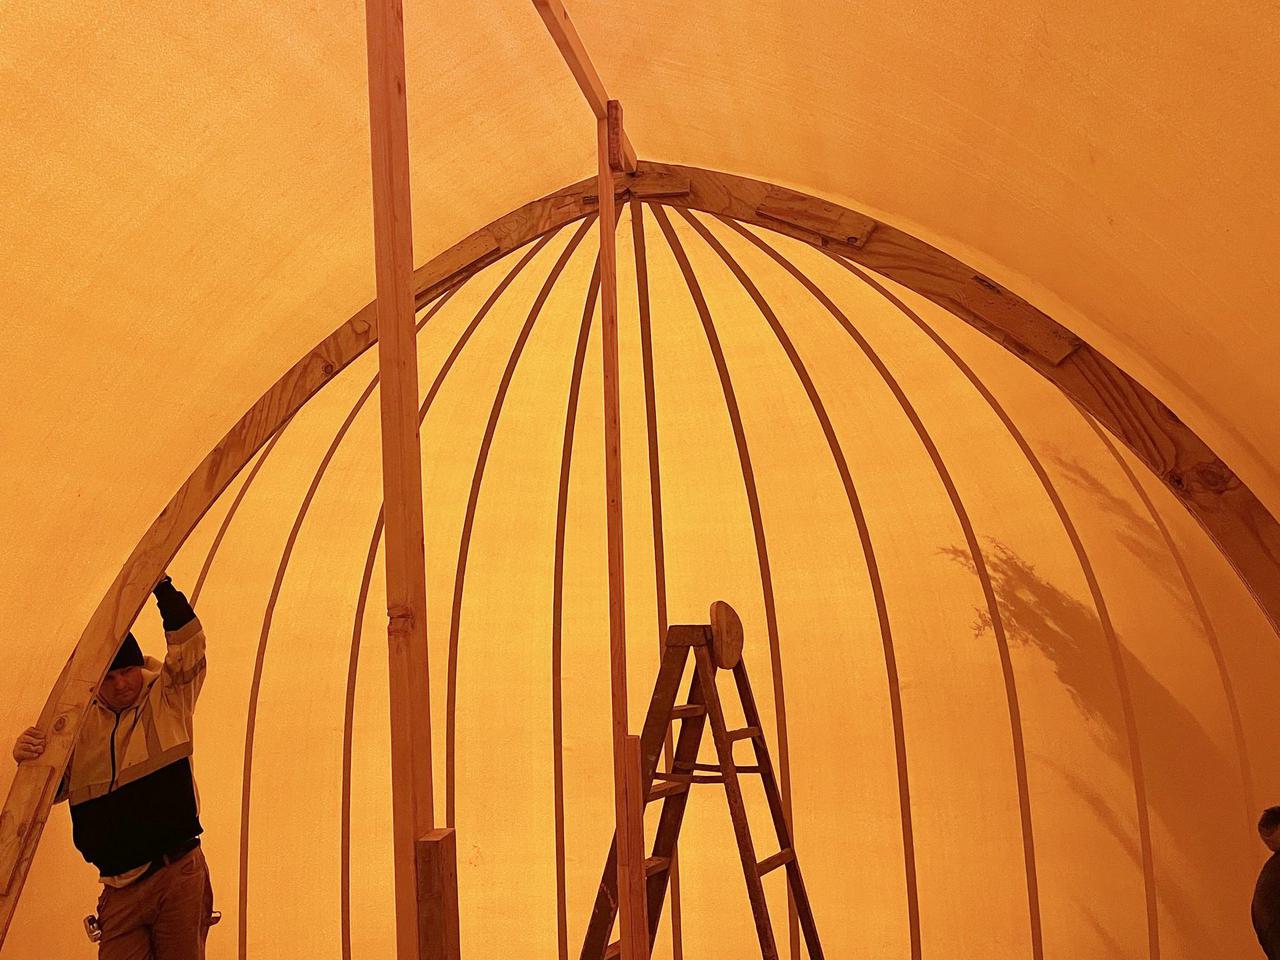 The top of the Gothic arch frame is placed inside the augment of the inflated Airform.